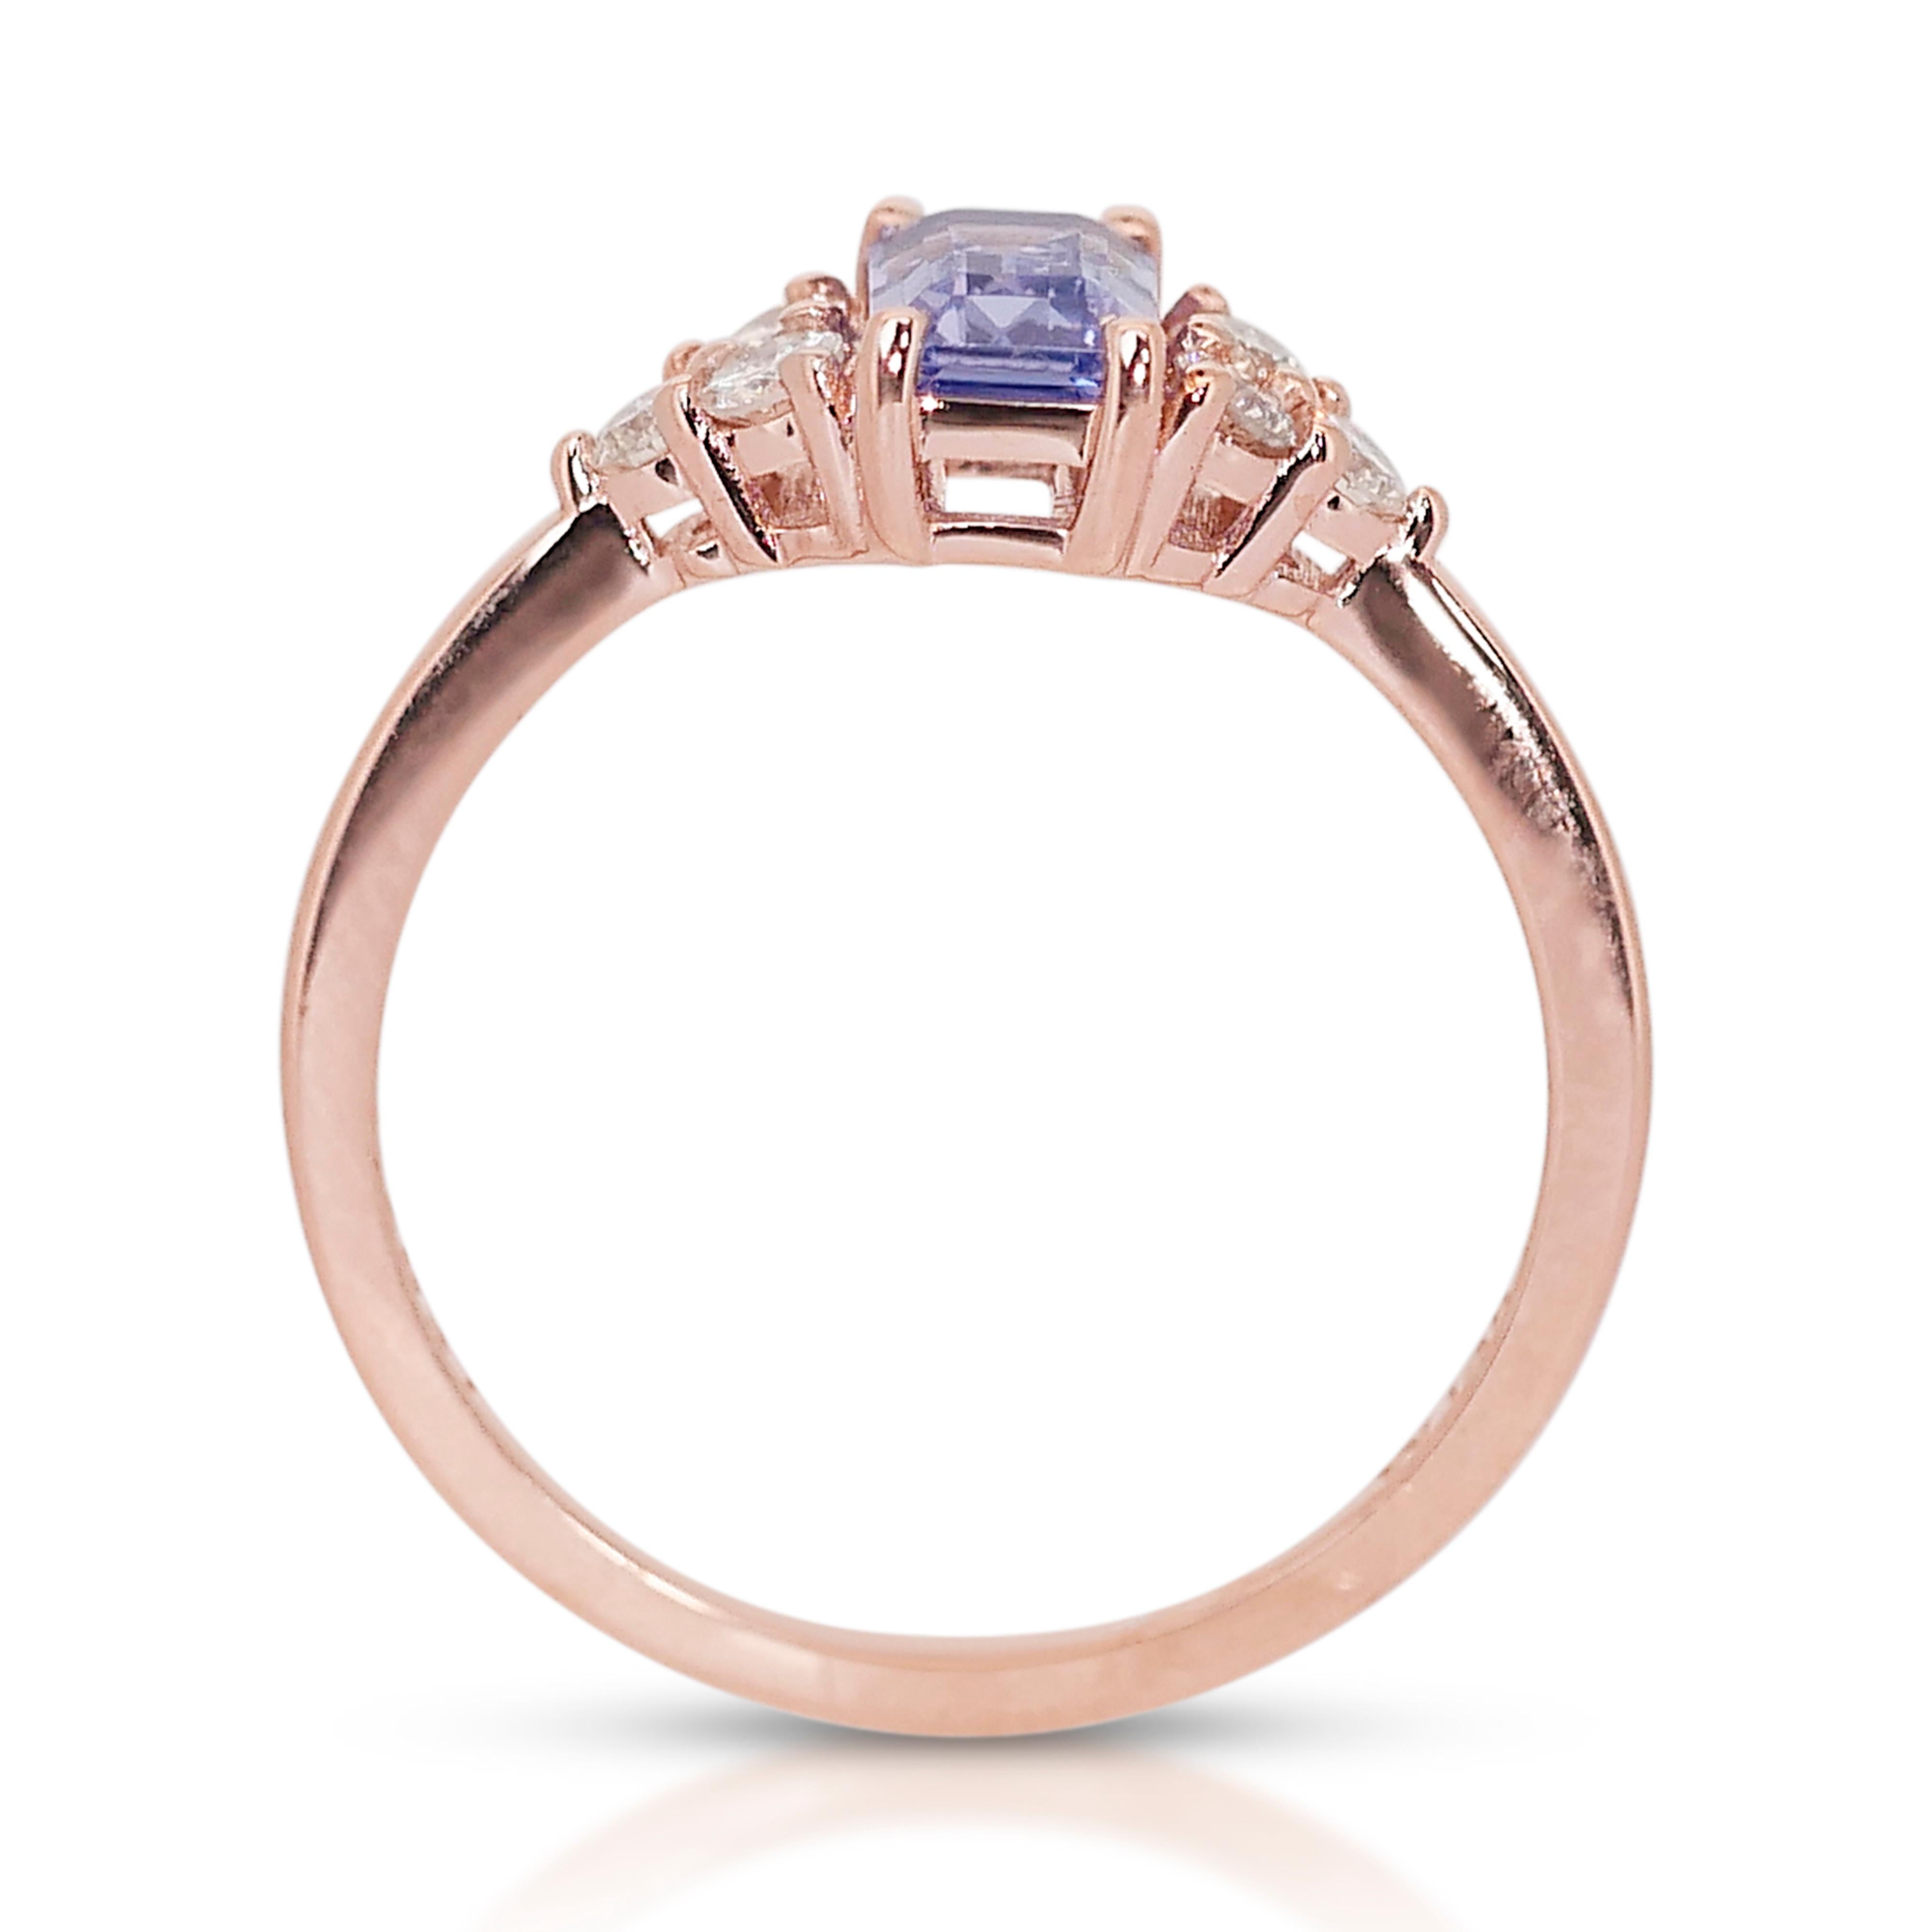 Captivating 1.14 ct Tanzanite and Diamond Pave Ring in 14k Rose Gold - IGI  For Sale 2